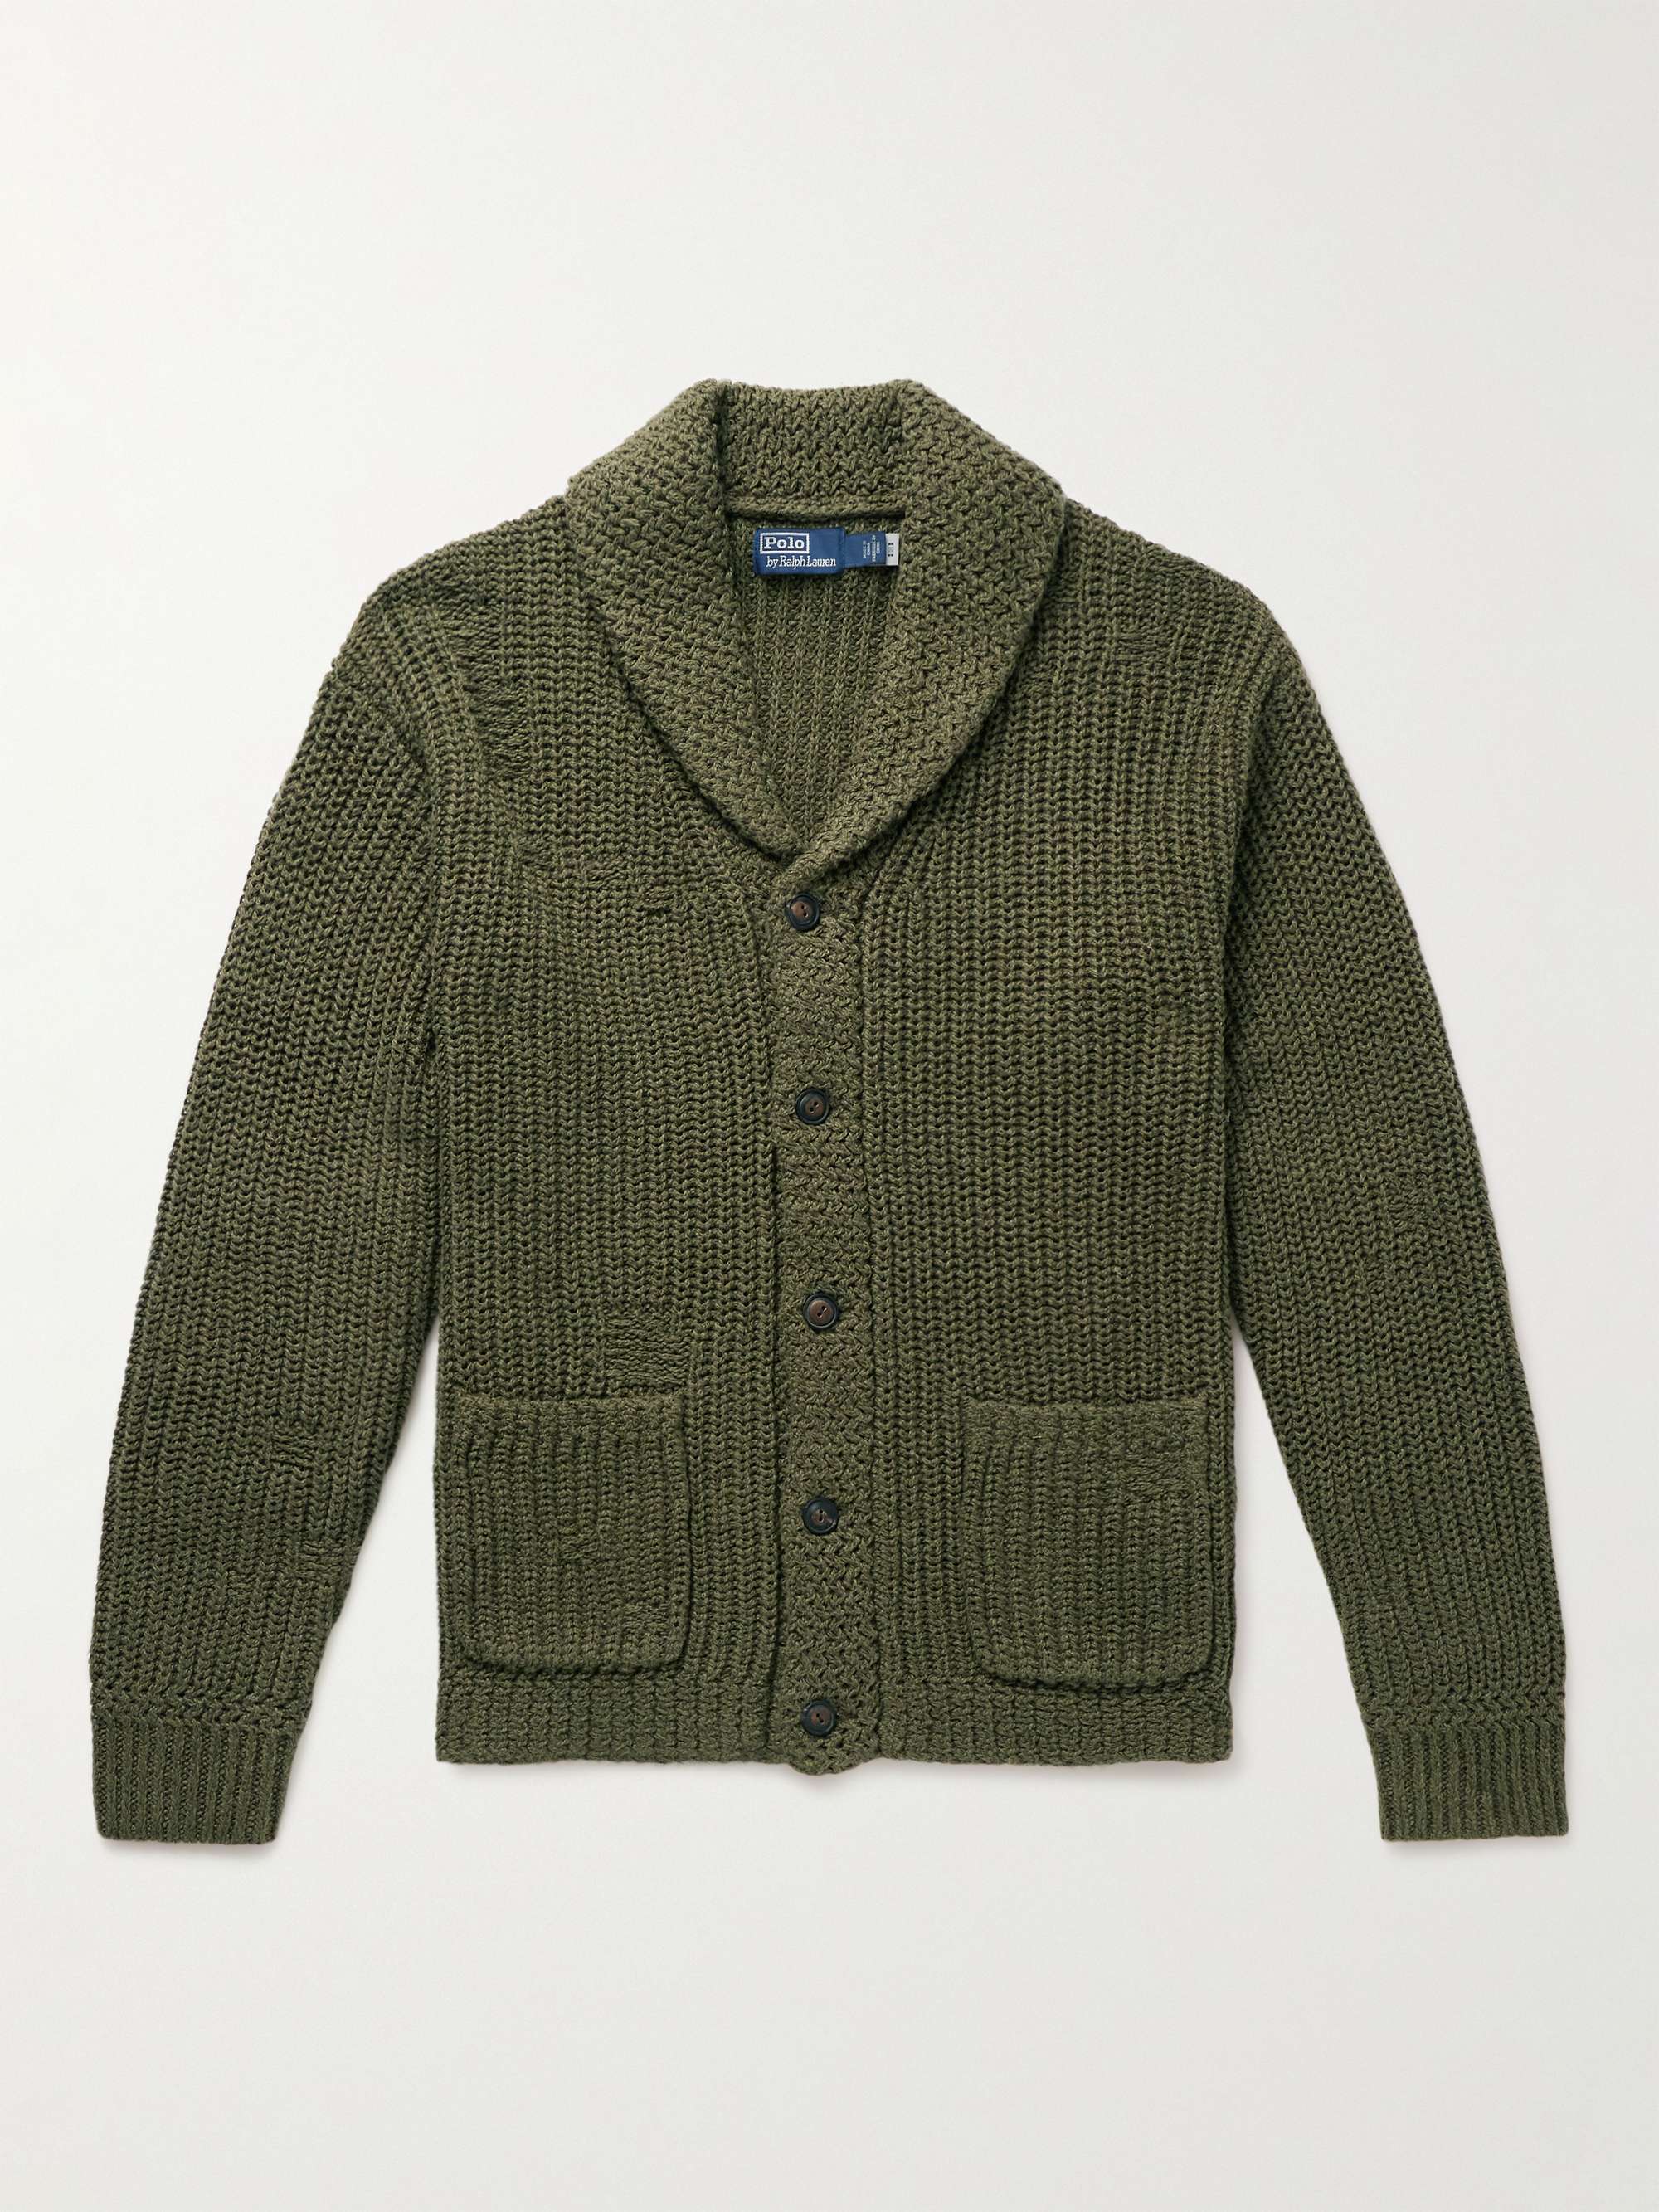 POLO RALPH LAUREN Shawl-Collar Ribbed Distressed Linen and Cotton-Blend  Cardigan for Men | MR PORTER